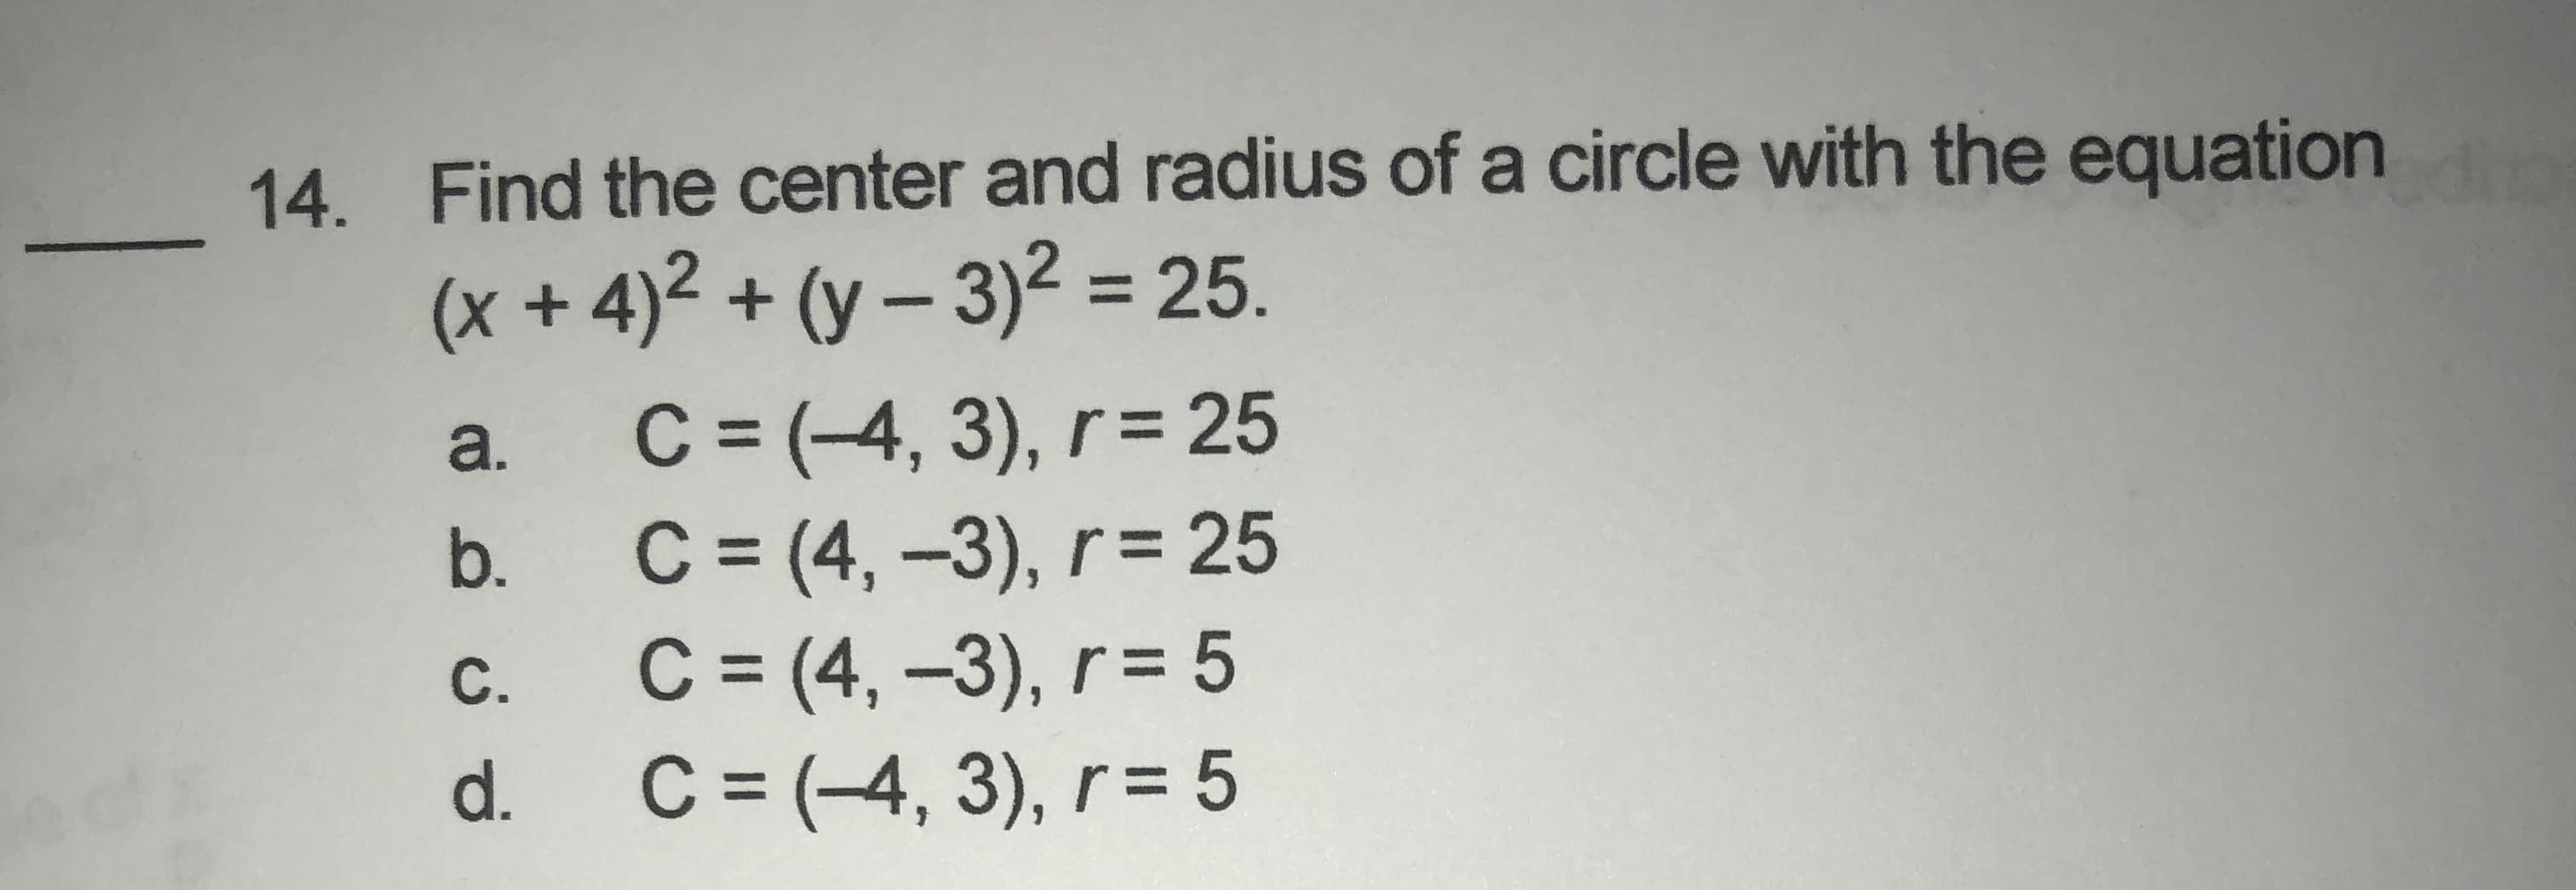 Find the center and radius of a circle with the equation
(x +4)² + (y – 3)² = 25.
%3D
C = (-4, 3), r= 25
C = (4, -3), r= 25
C = (4, -3), r= 5
C = (-4, 3), r = 5
a.
b.
C.
d.
